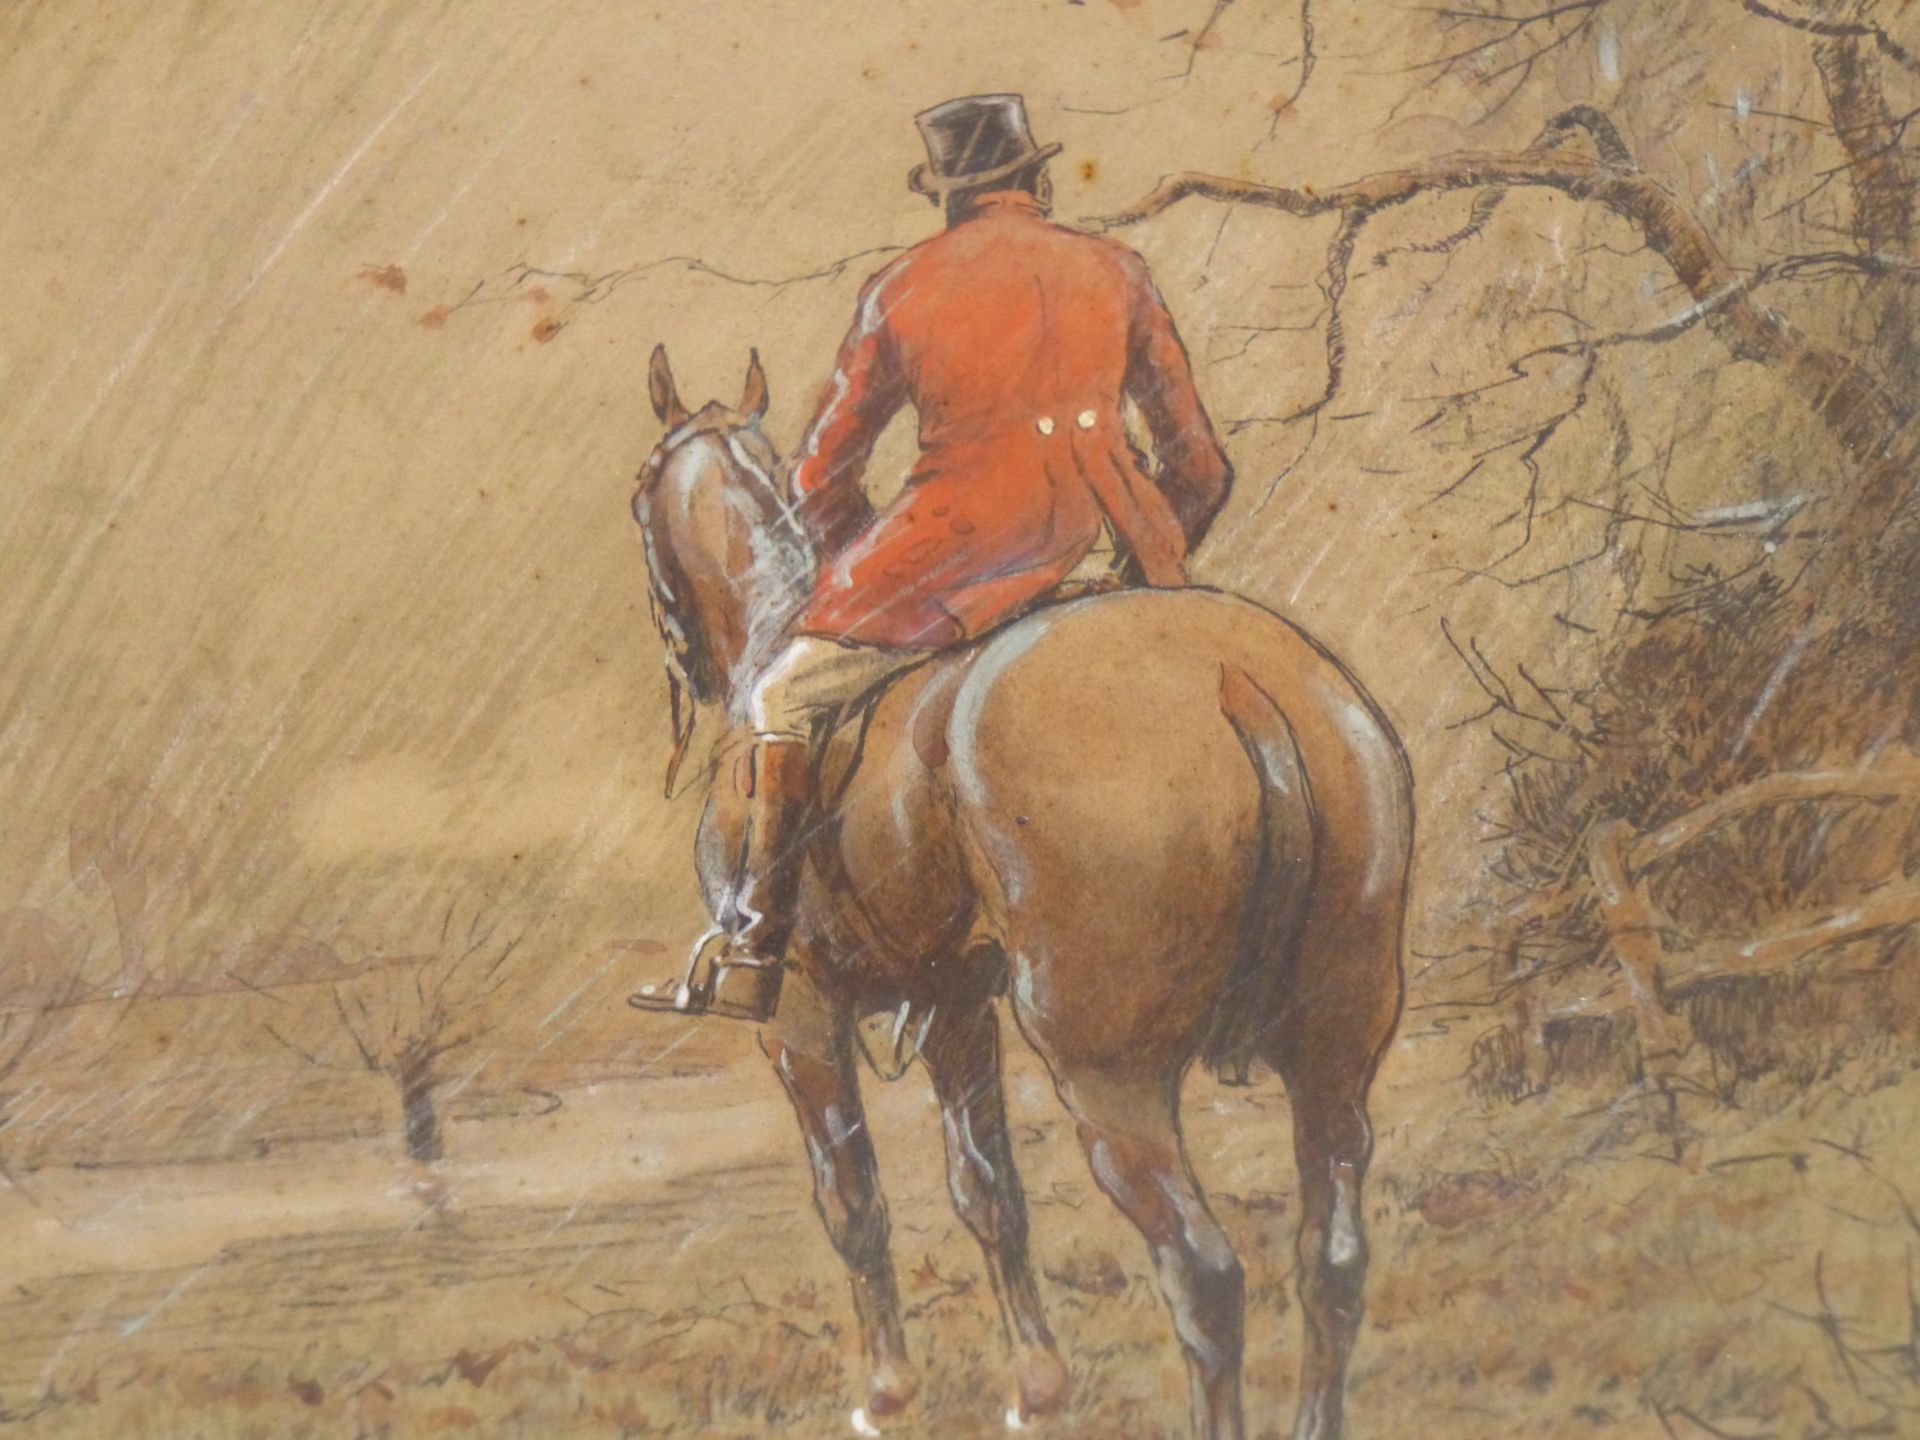 SNAFFLES- CHARLES JOHNSON PAYNE. "FOXCATCHERS" WITH REMARQUE "FOR THE RIDE OUT AND THE RIDE HOME". - Image 2 of 9